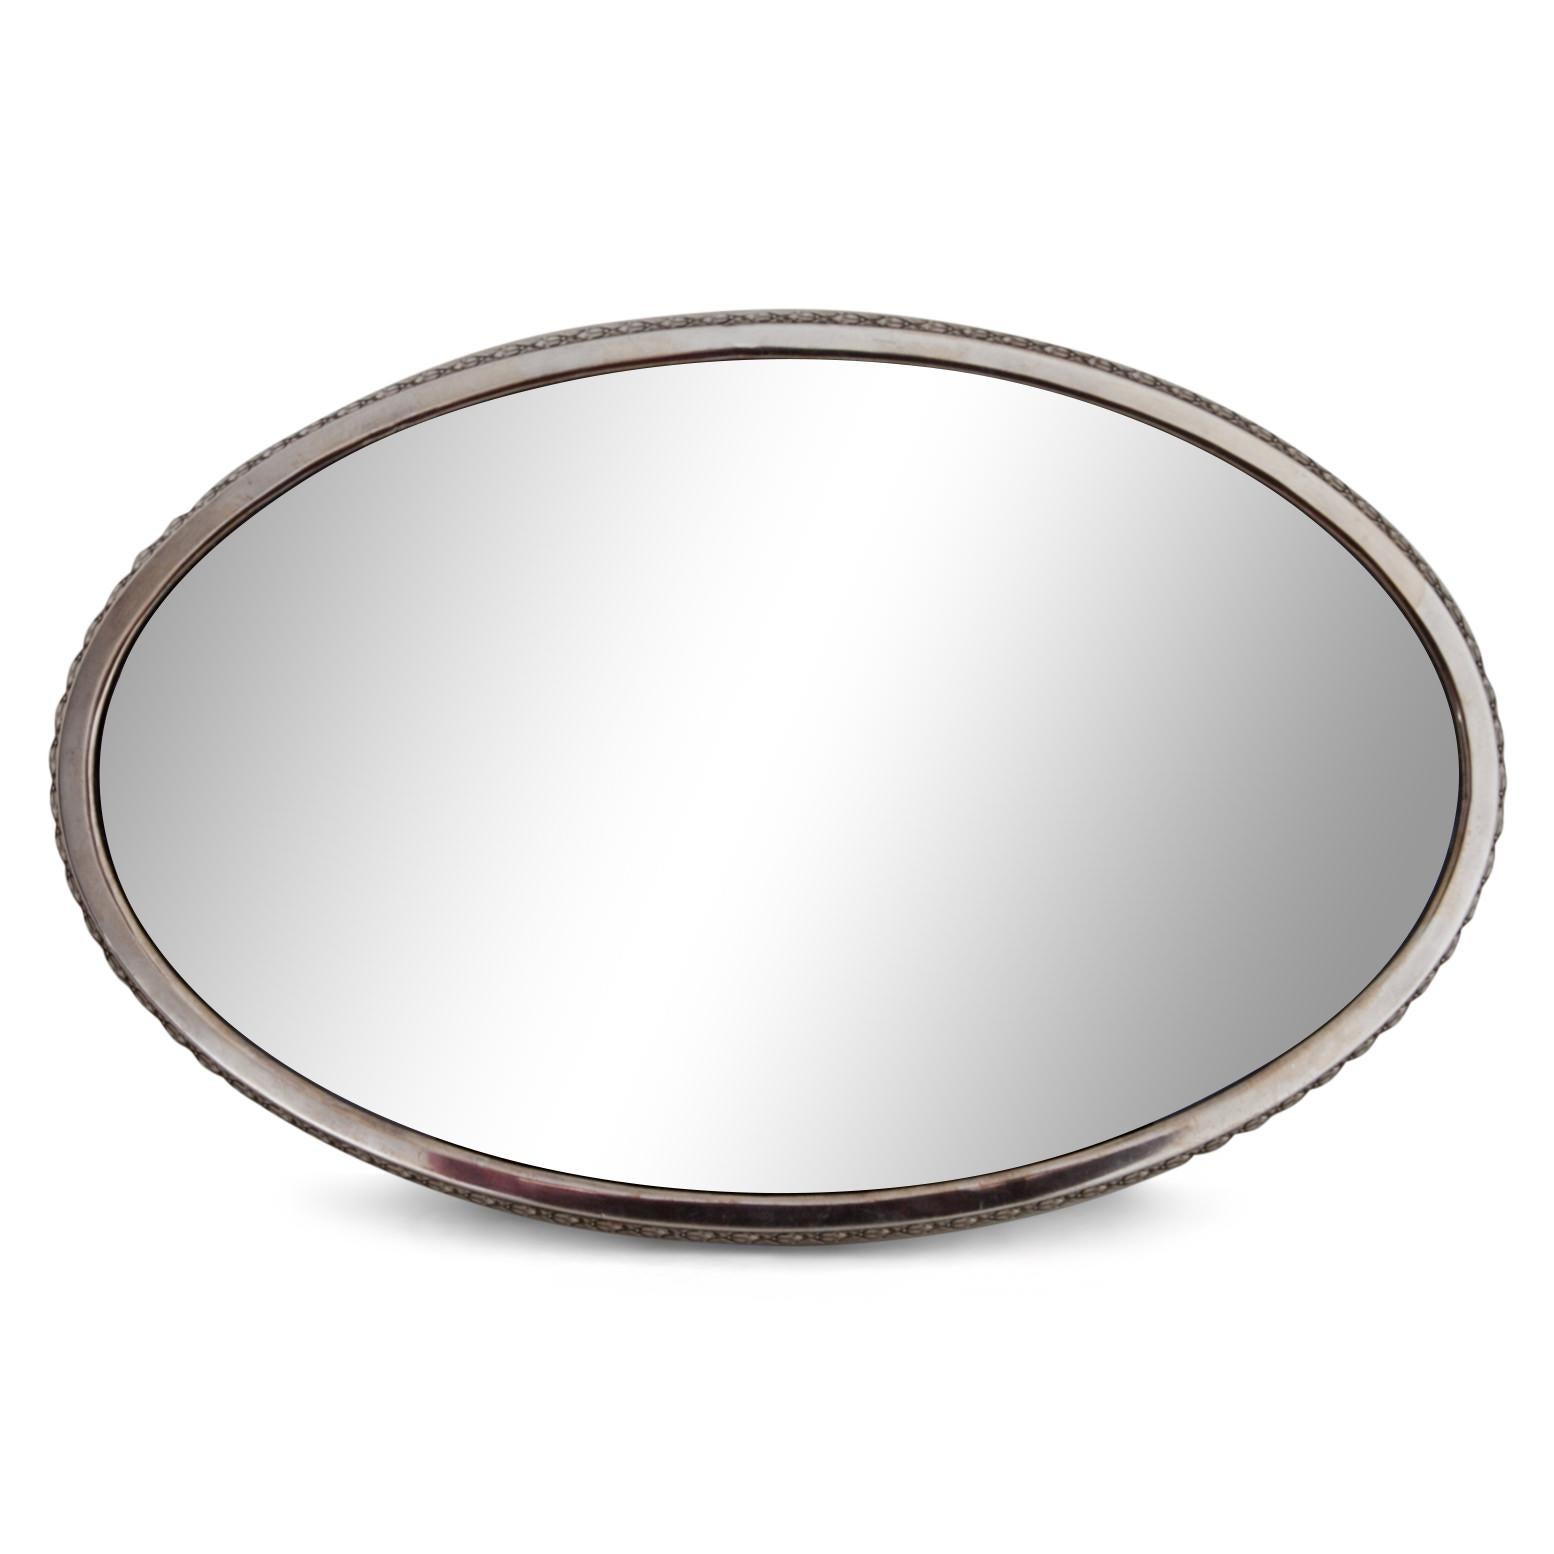 Oval tablet by Ivan Semenowitsch Gubkin with a mirrored surface in a profiled silver frame with laurel-wreath décor. Stamped on the rim.